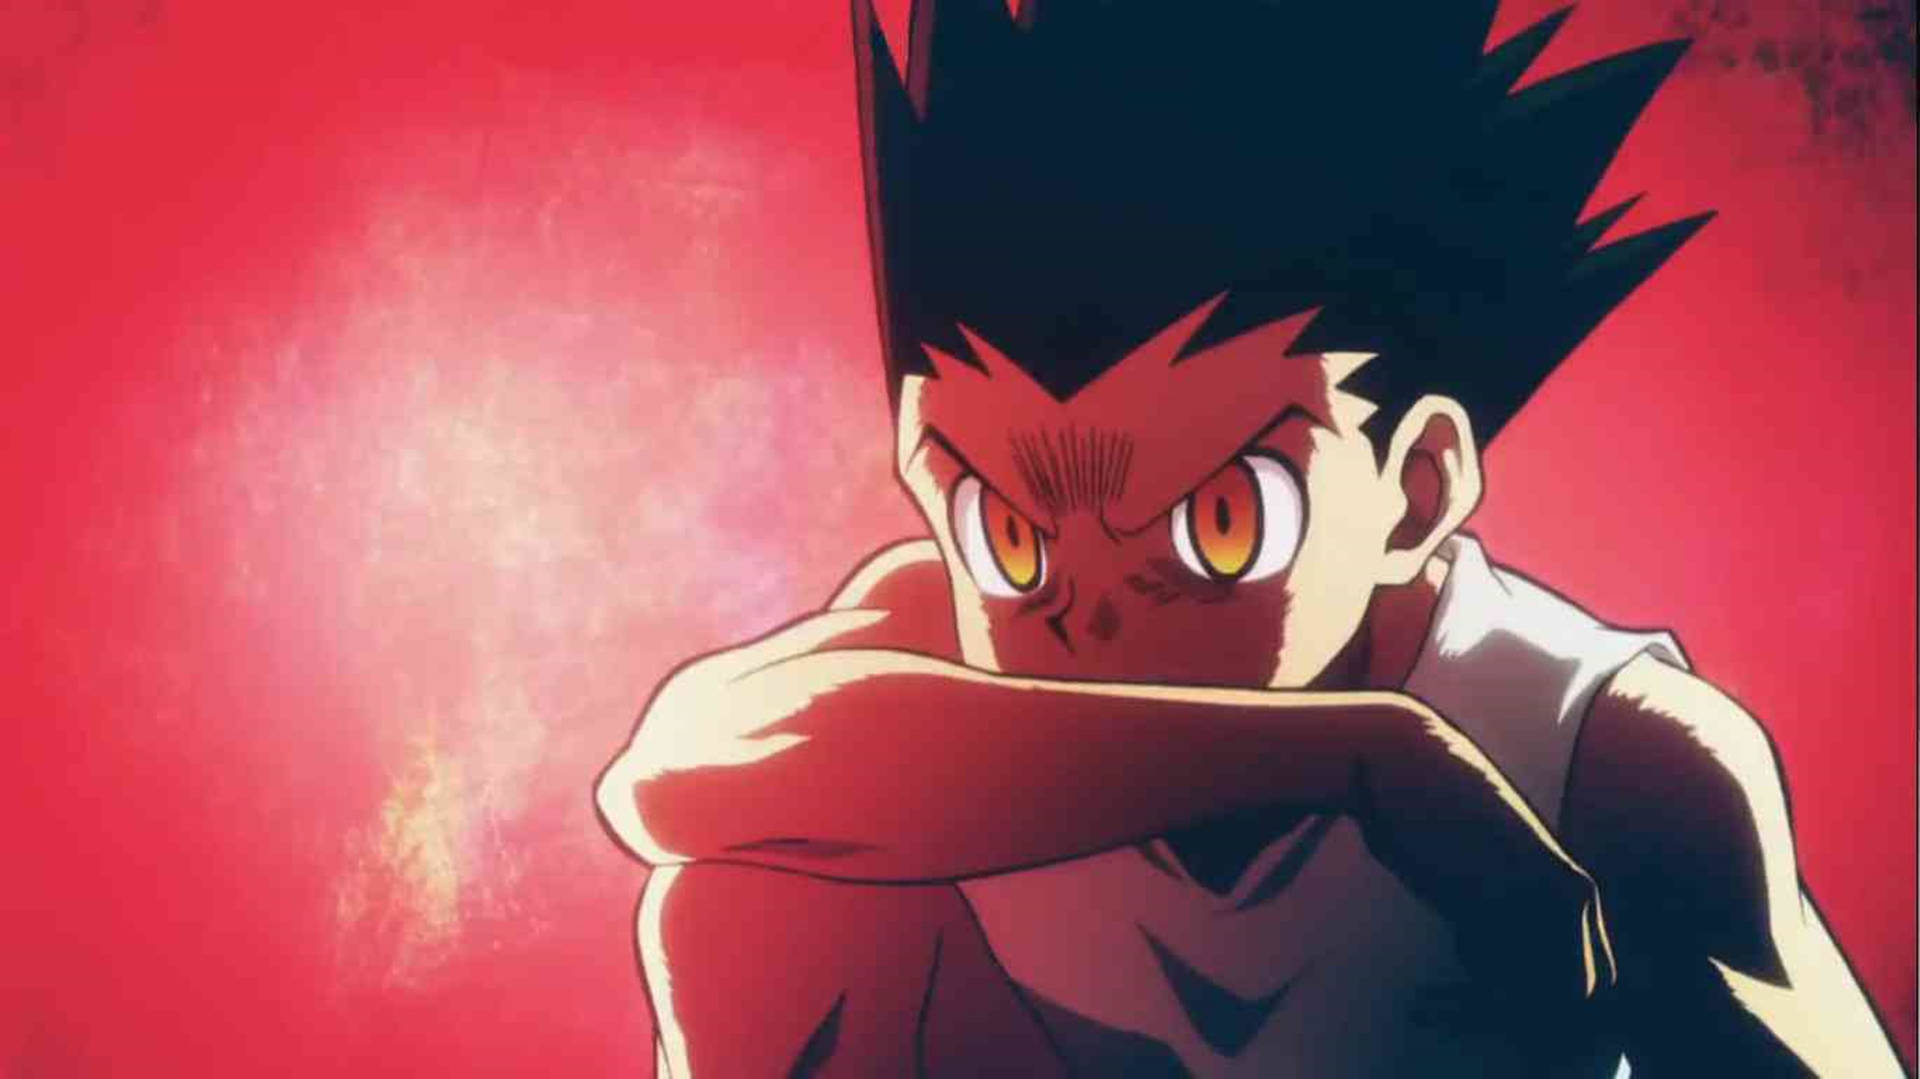 Follow Gon Freecss on an Exciting Adventure in the World of Hunter X Hunter Wallpaper